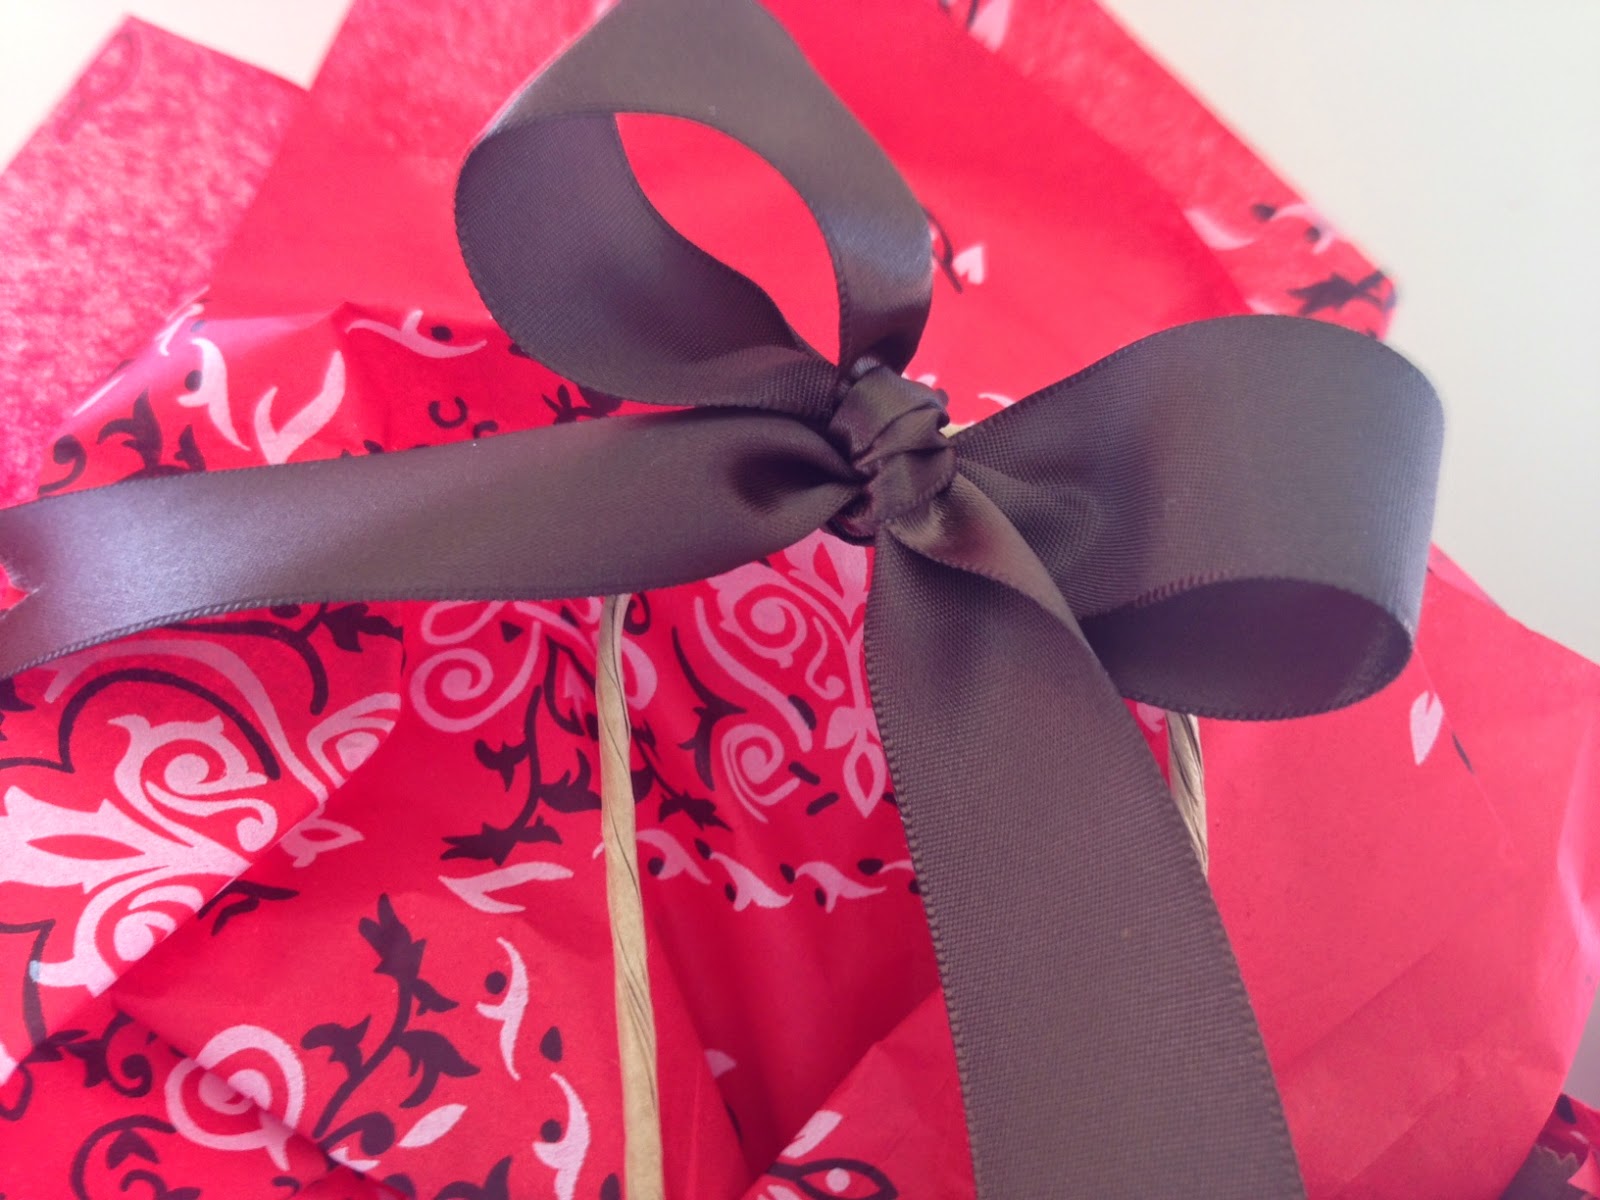 Creative Packaging: Cowboy inspired gift wrap